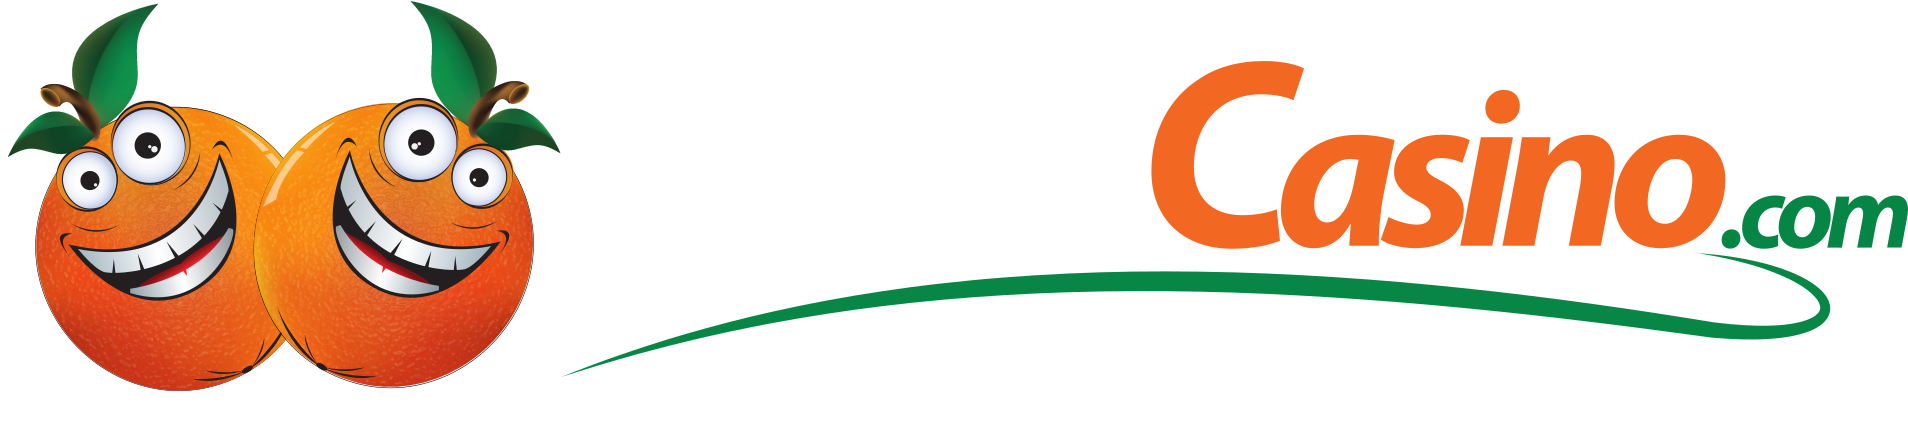 Casino as One of the Deal Casino Websites with free $ sign up bonuses